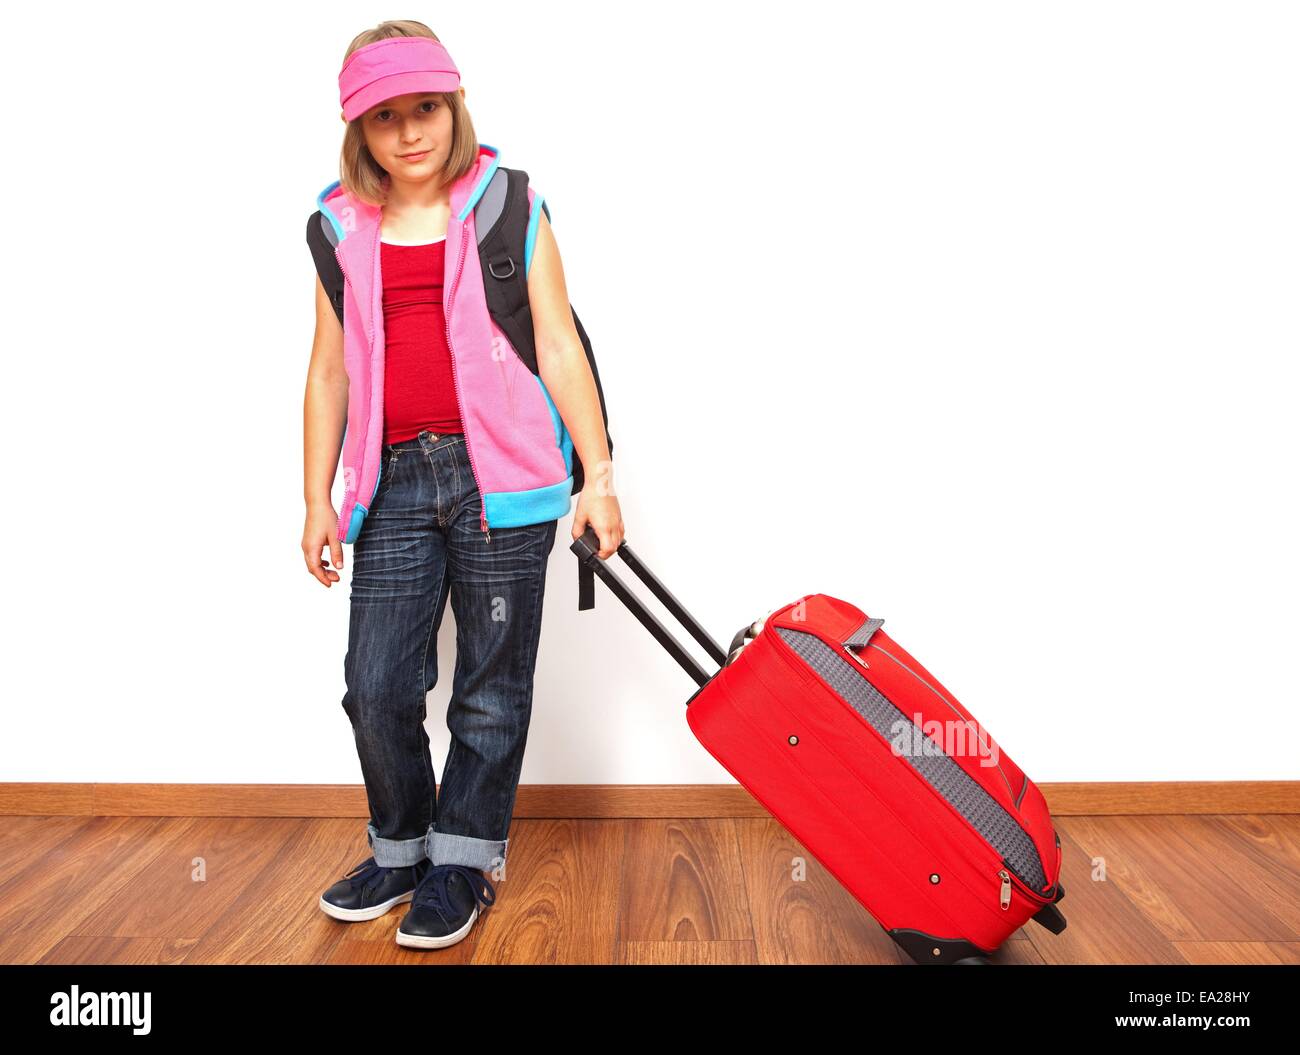 Little girl ready to travel, carrying red luggage Stock Photo